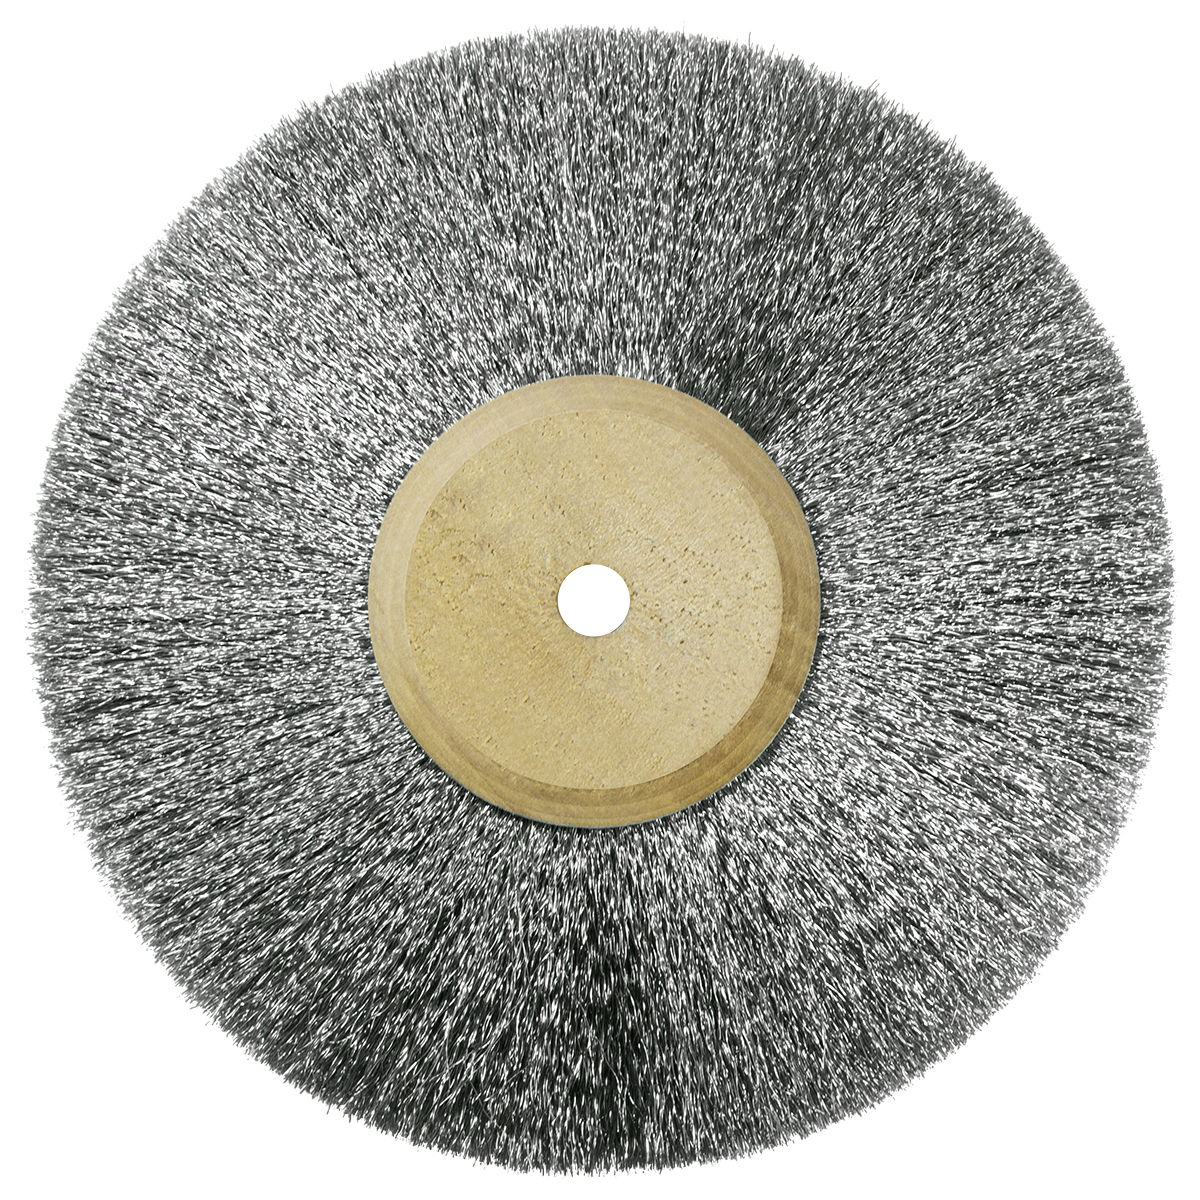 Circular brush, steel, Ø 100 mm, wire 0,12 mm, 4-row, with wooden core